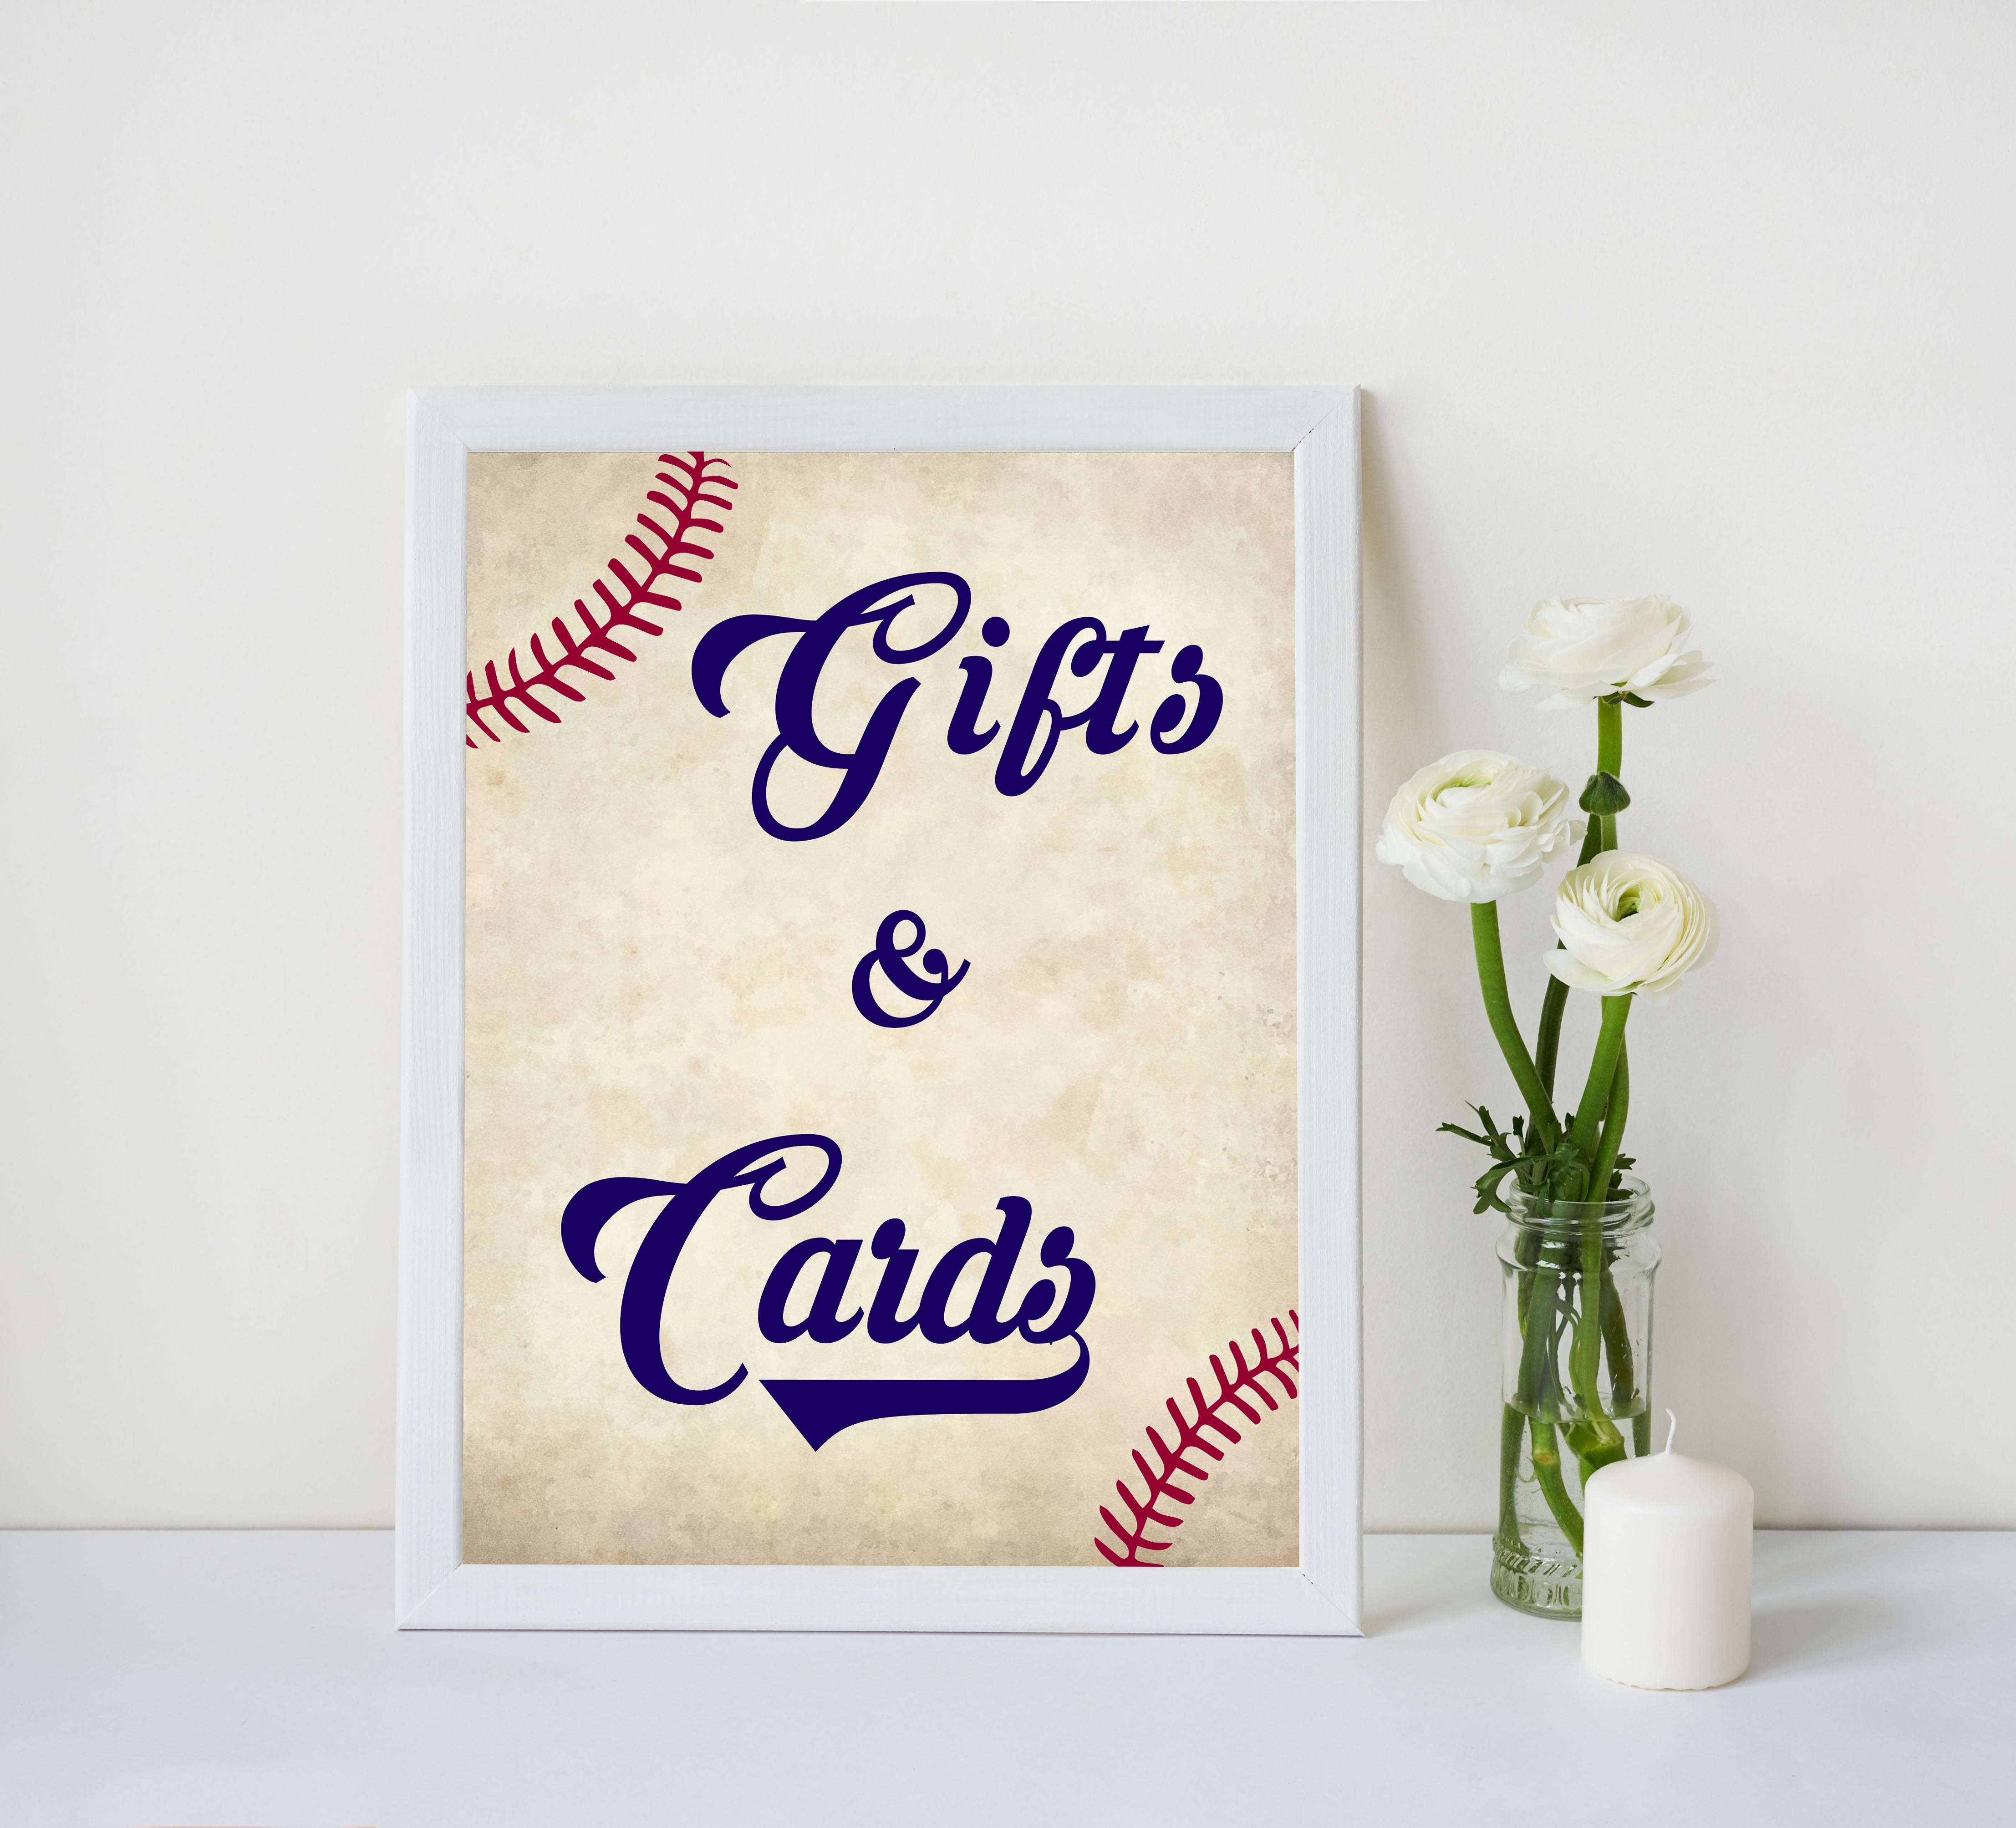 8 baby shower signs, 8 baby shower table signs, Baseball baby signs, baseball baby decor, printable baby shower decor, fun baby decor, baby food signs, printable baby shower ideas